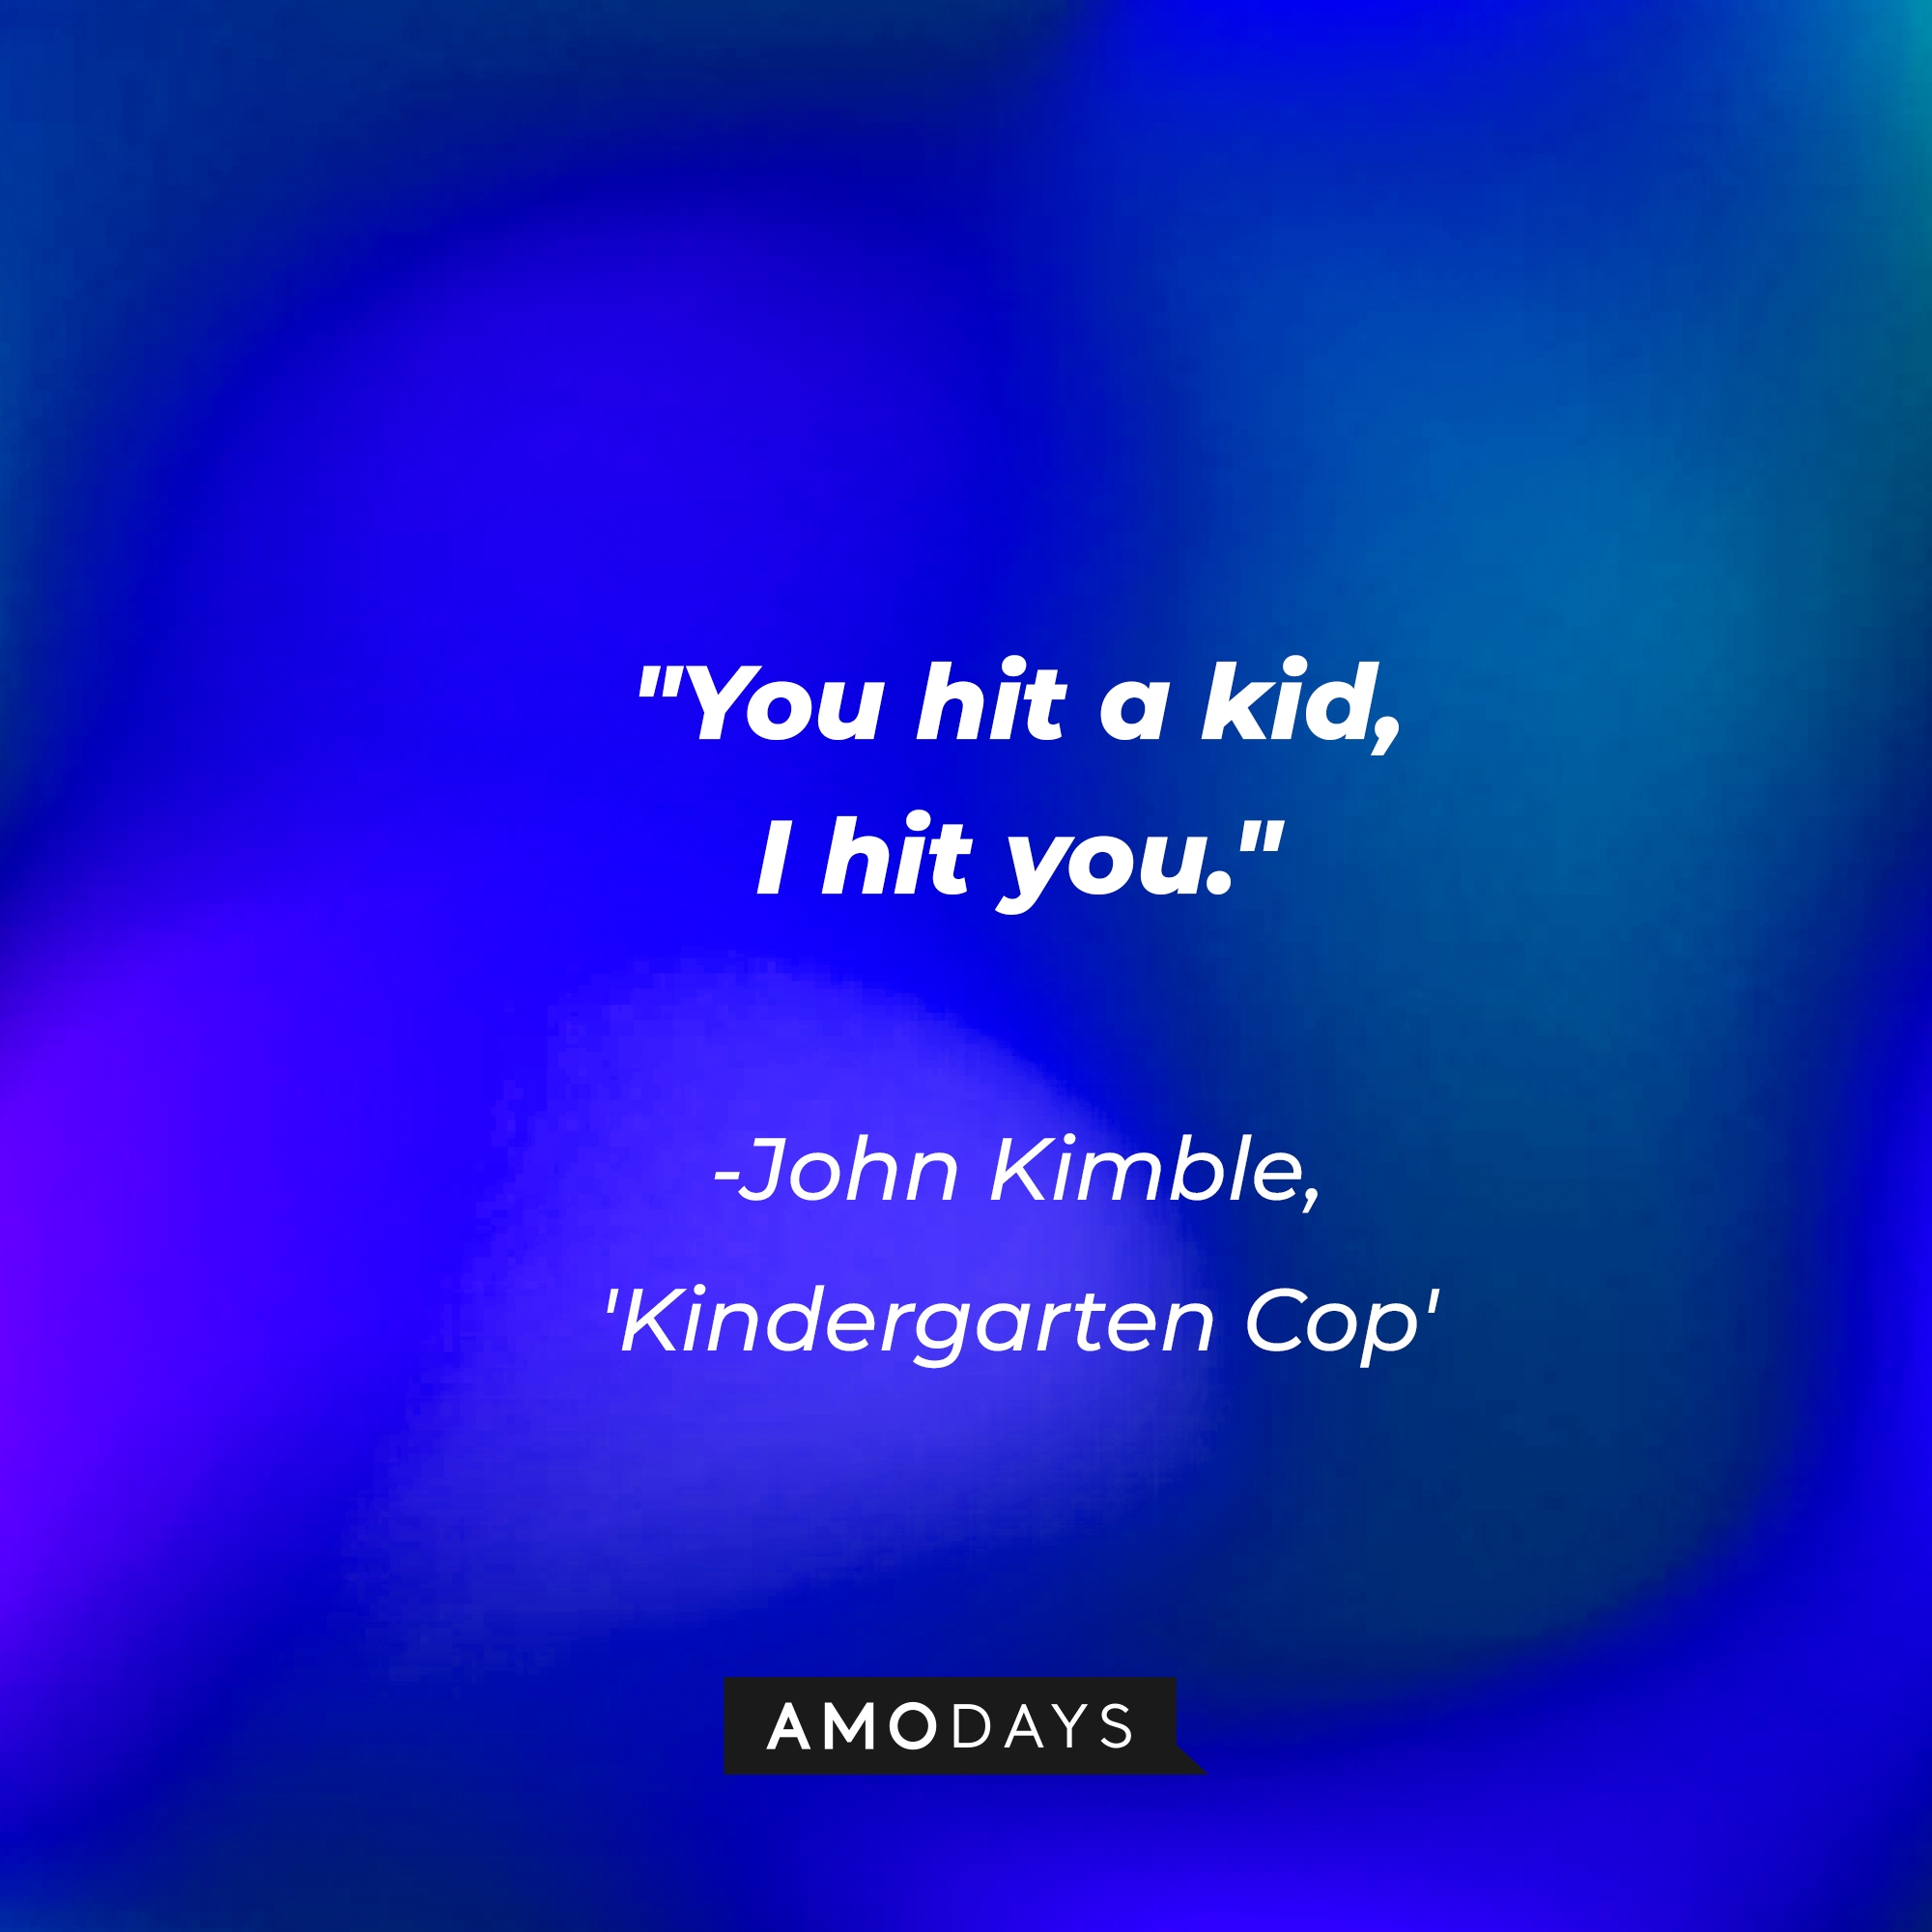 Detective John Kimble's quote in "Kindergarten Cop:" "You hit a kid, I hit you." | Source: AmoDays